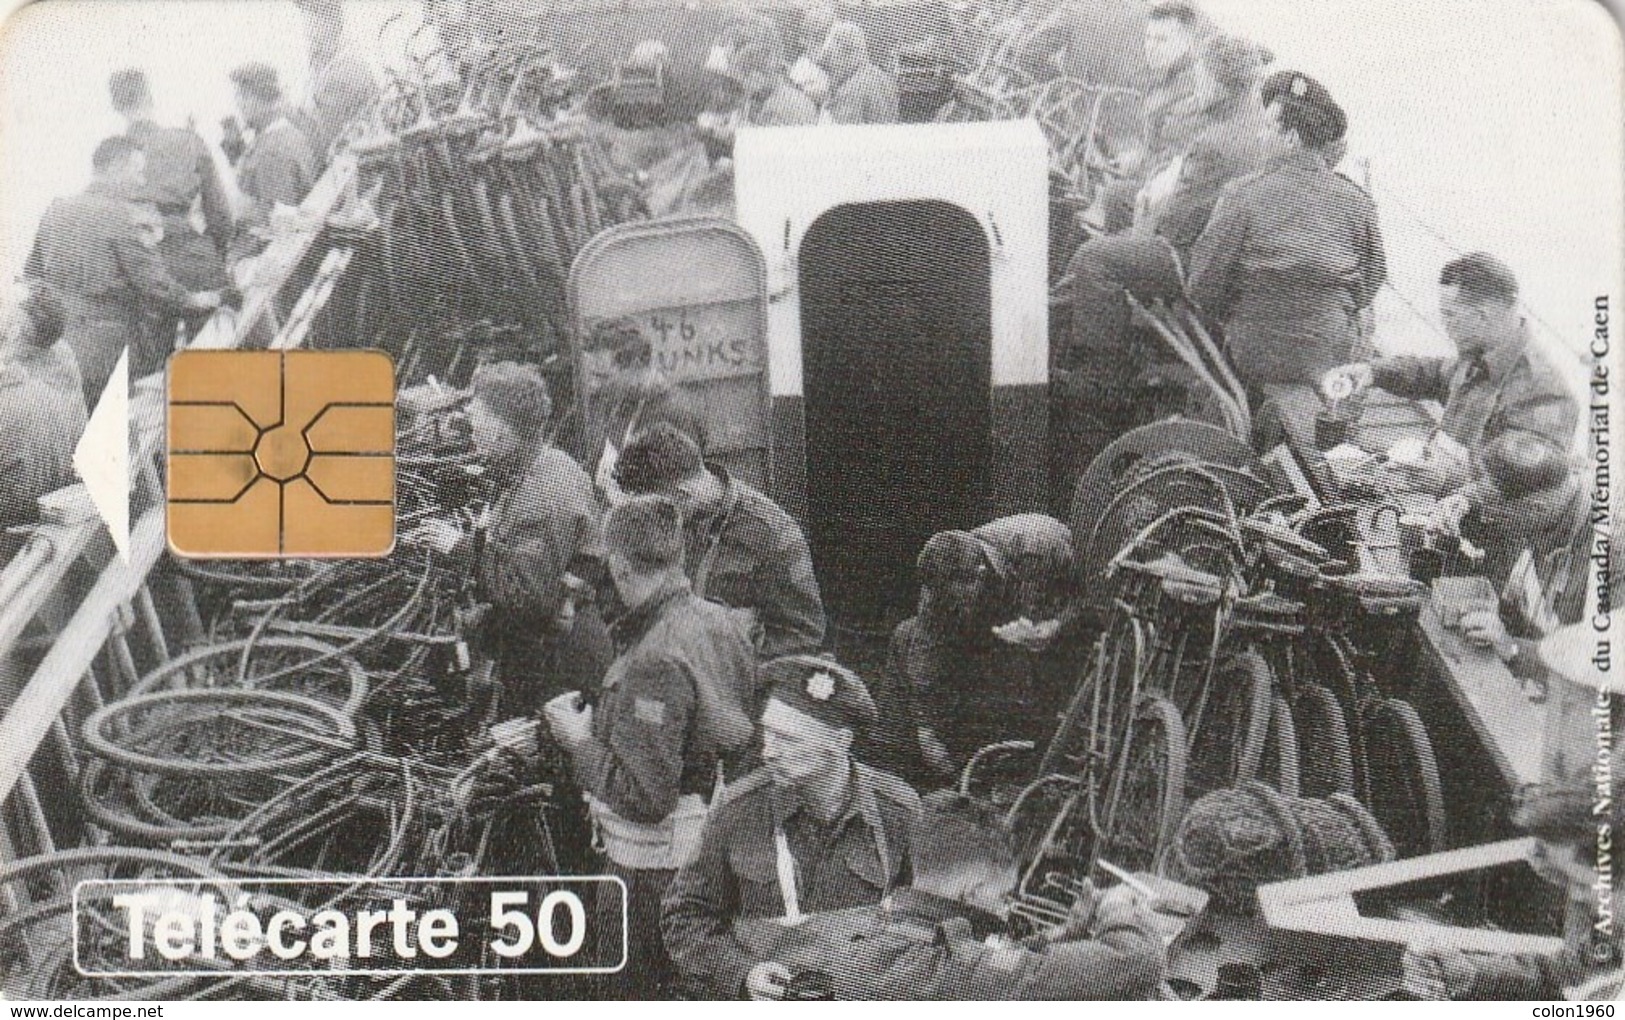 FRANCIA. 50th Anniversary Of Landings And The Liberation Of France. Debarquement Flotille. 0474. 06/94. (309). - Army